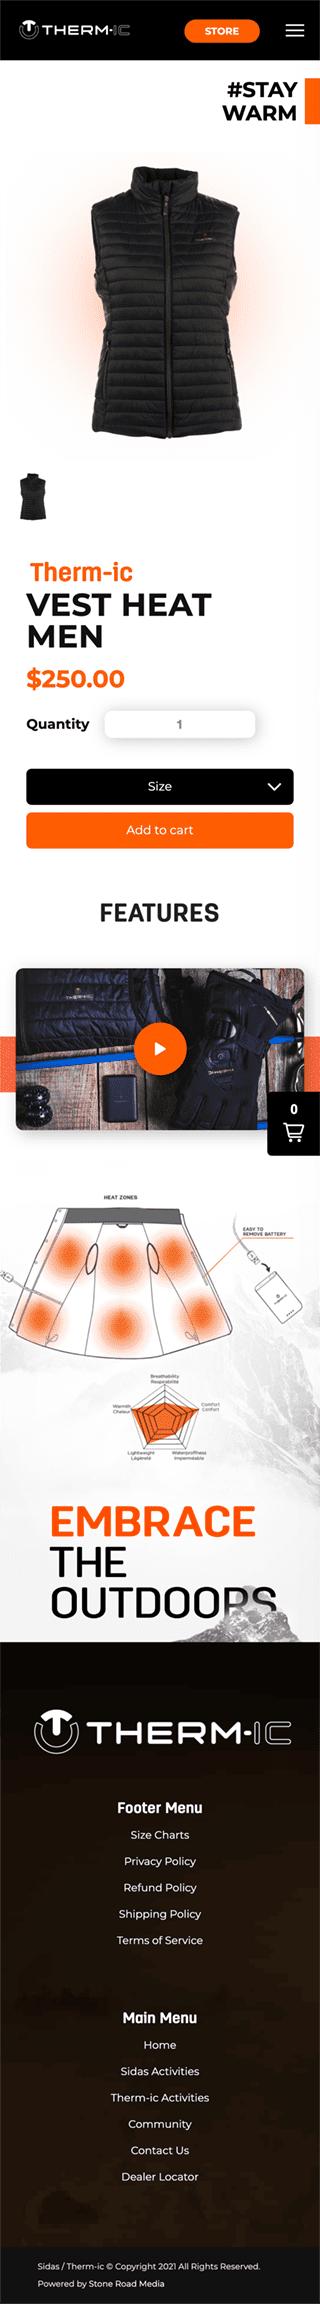 mobile therm-ic shopify headless product page